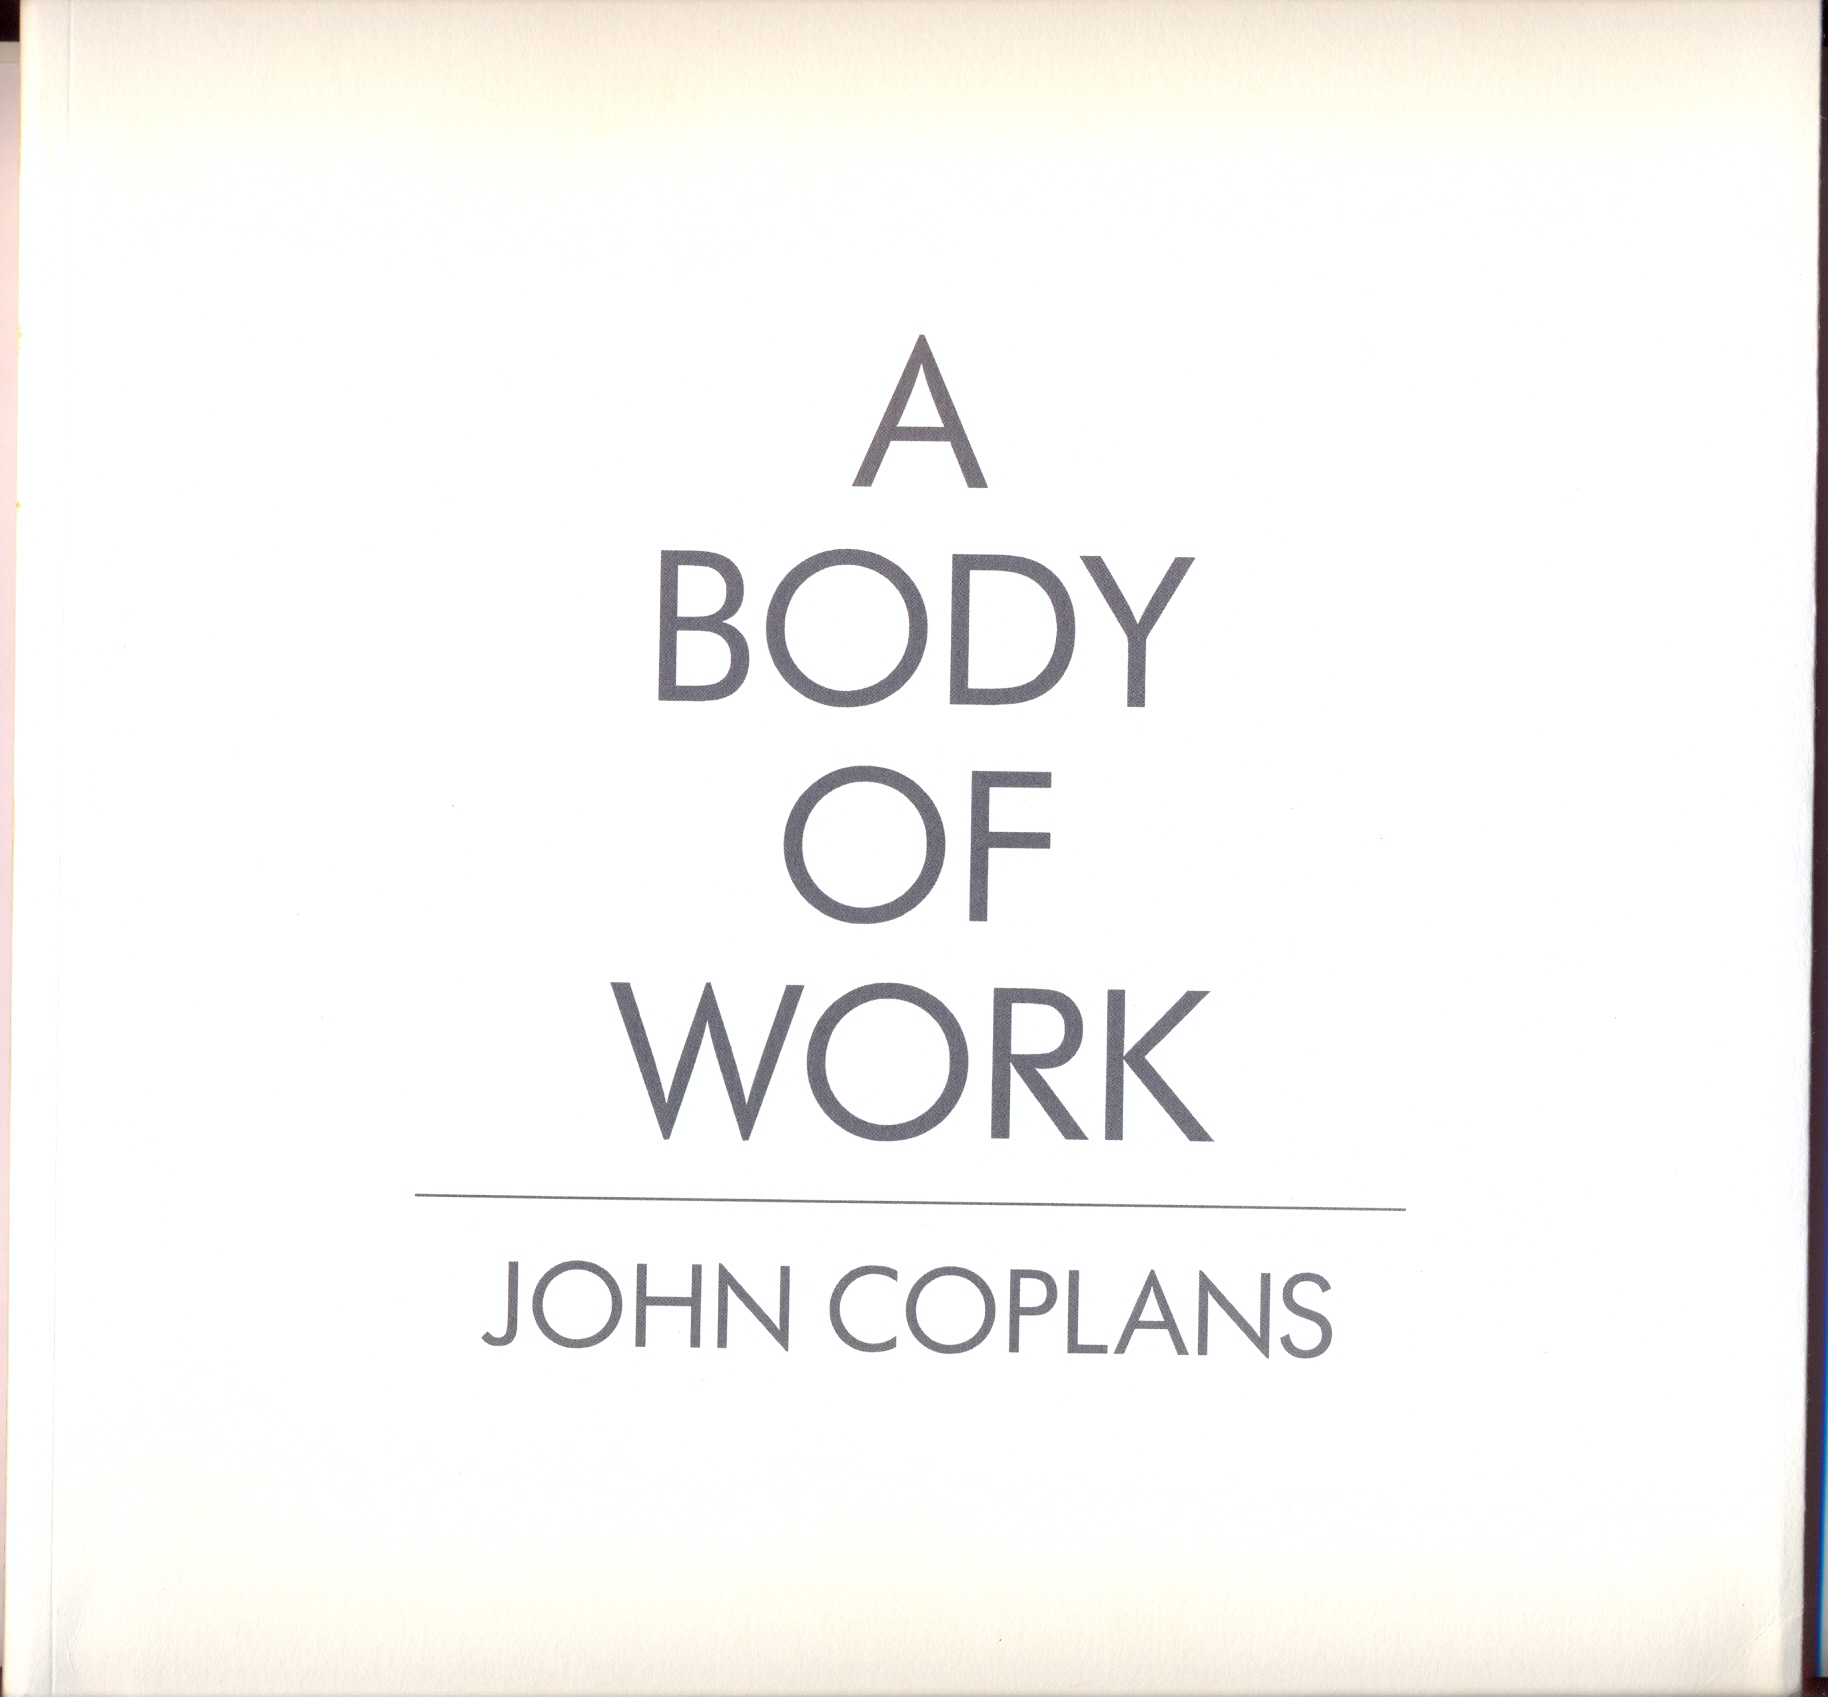 A body of work